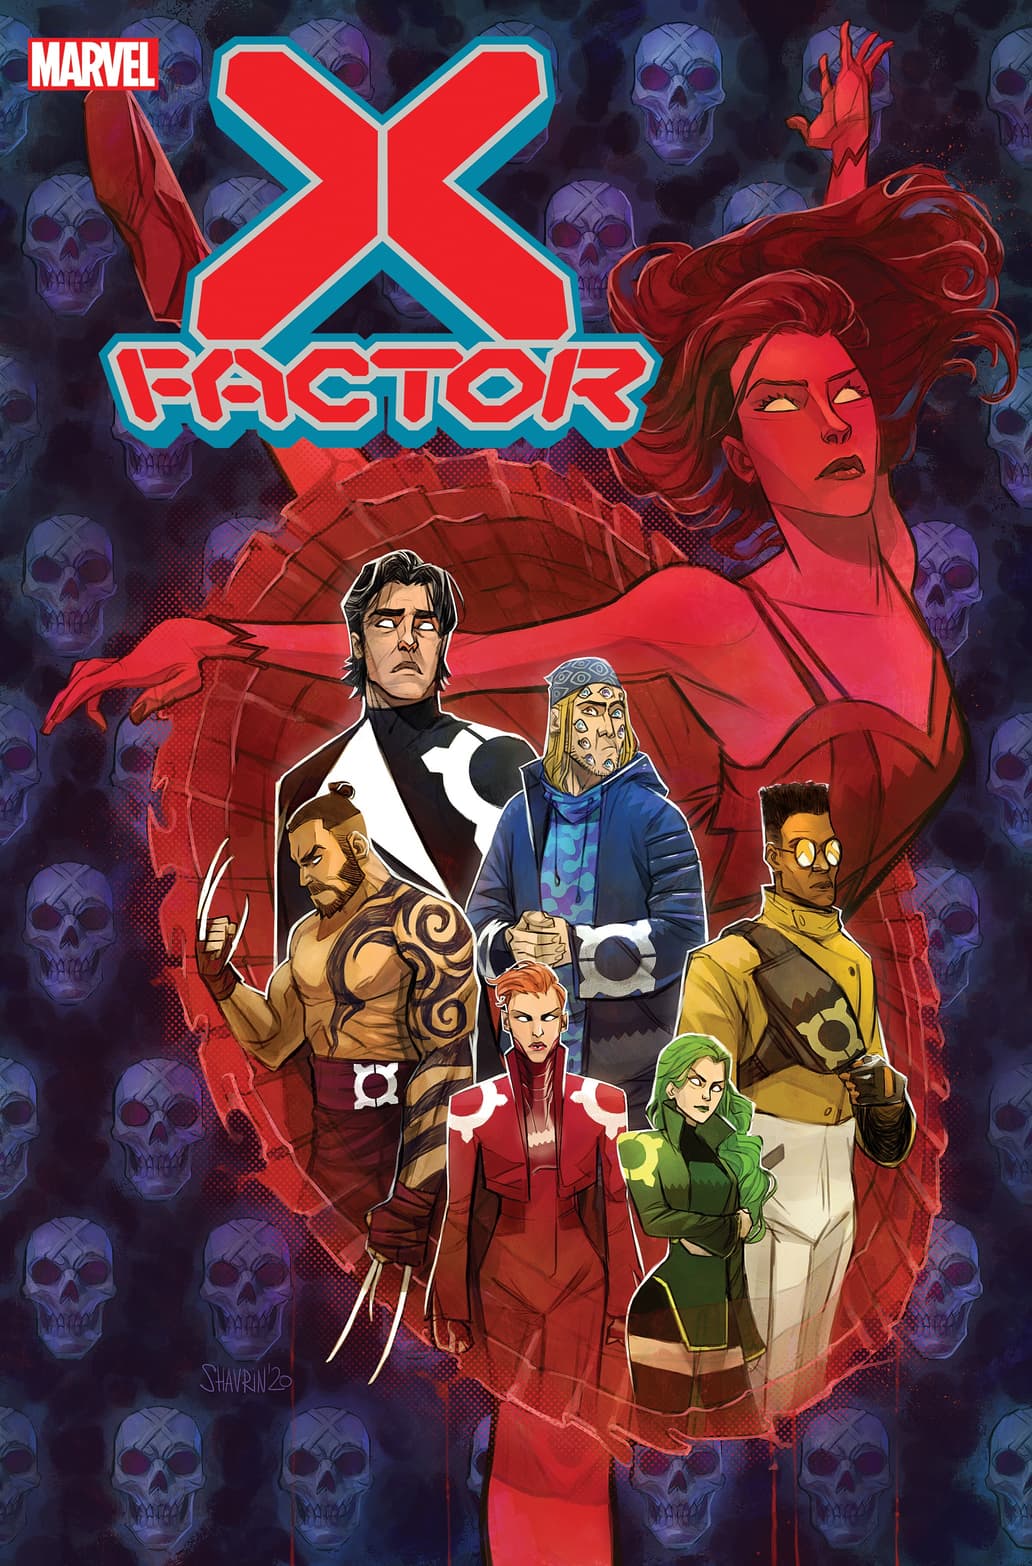 X-FACTOR #2 cover by Ivan Shavrin